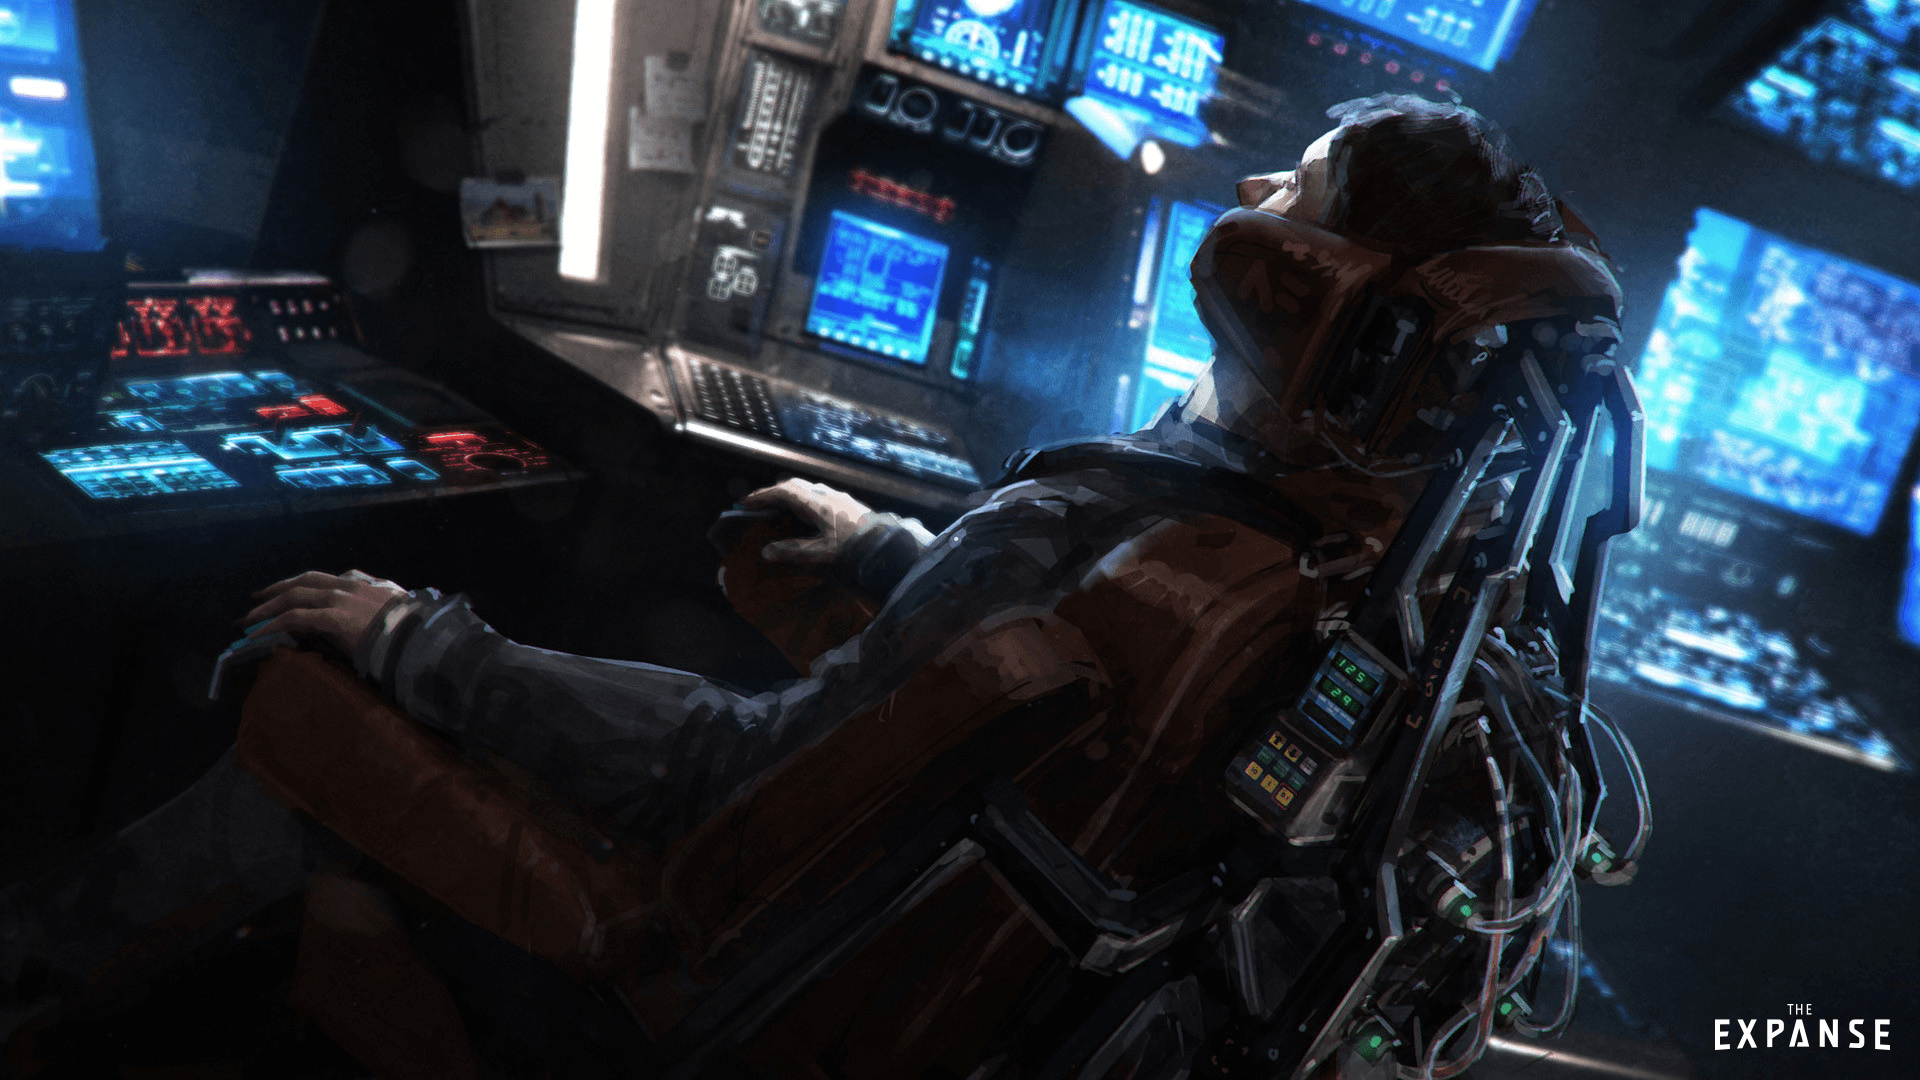 Download the The Expanse Art Wallpaper, The Expanse Art iPhone.